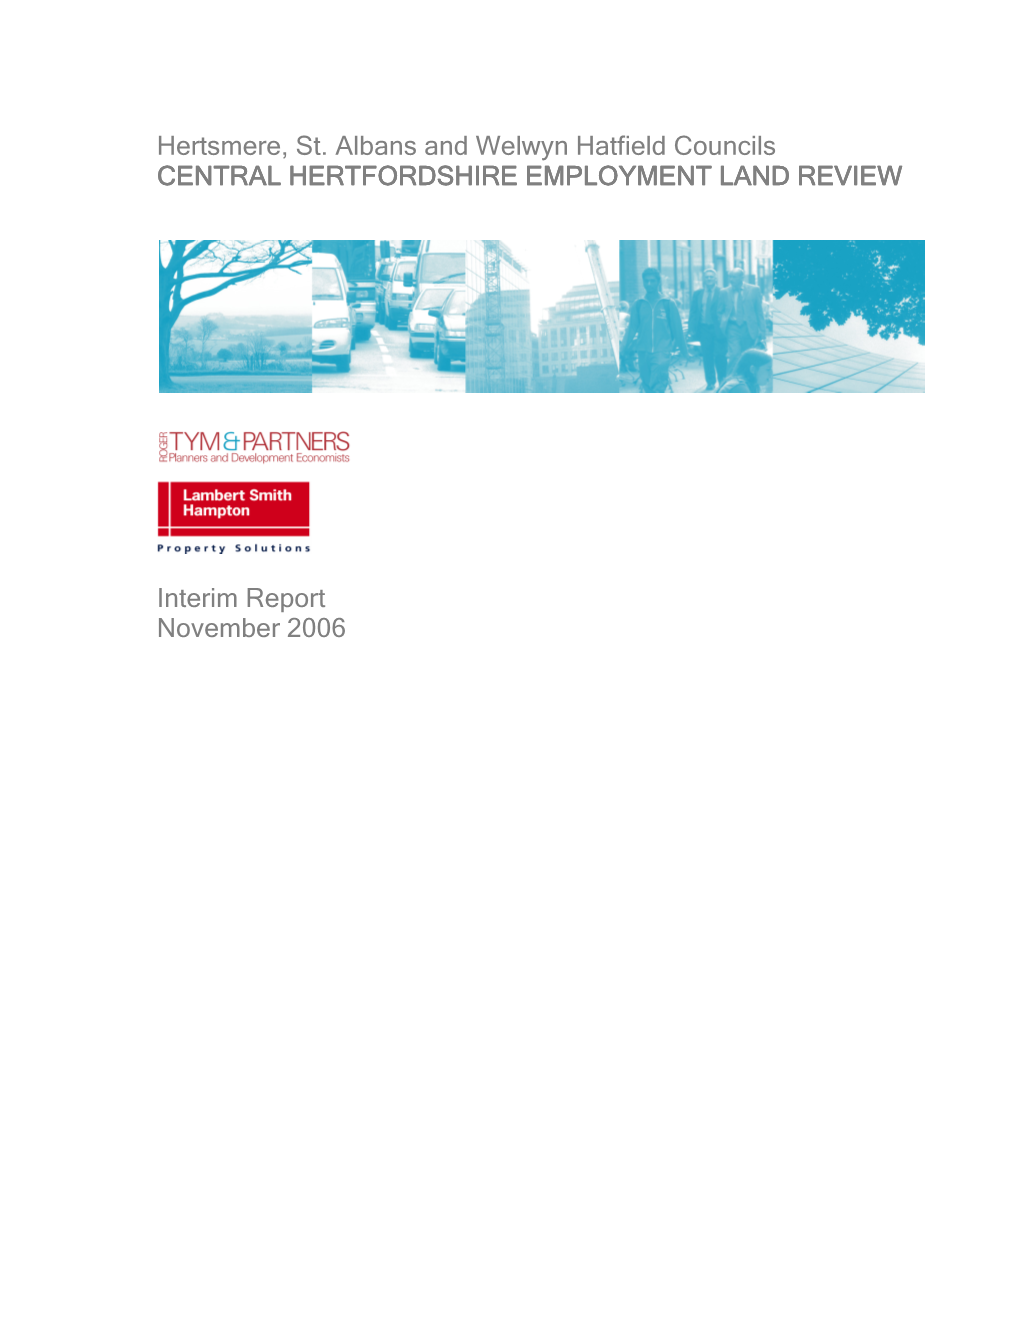 Central Herts Employment Land Review Interim Report Nov 06